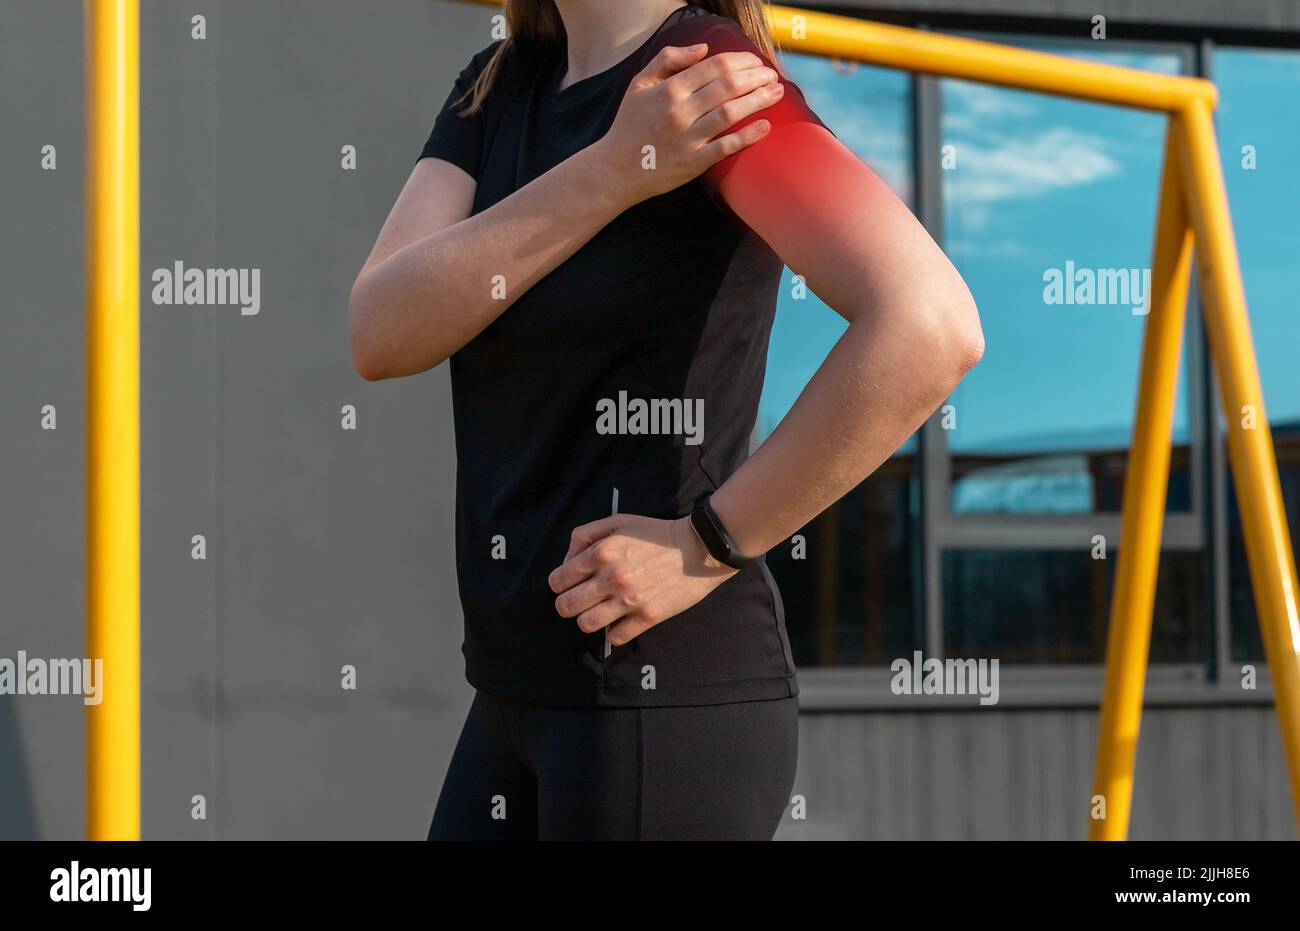 Athlete touching painful shoulder with red point during outdoor training. Dislocation, arthritis, fracture, rotator cuff strain consequences. Health problems in sport concept. High quality photo Stock Photo